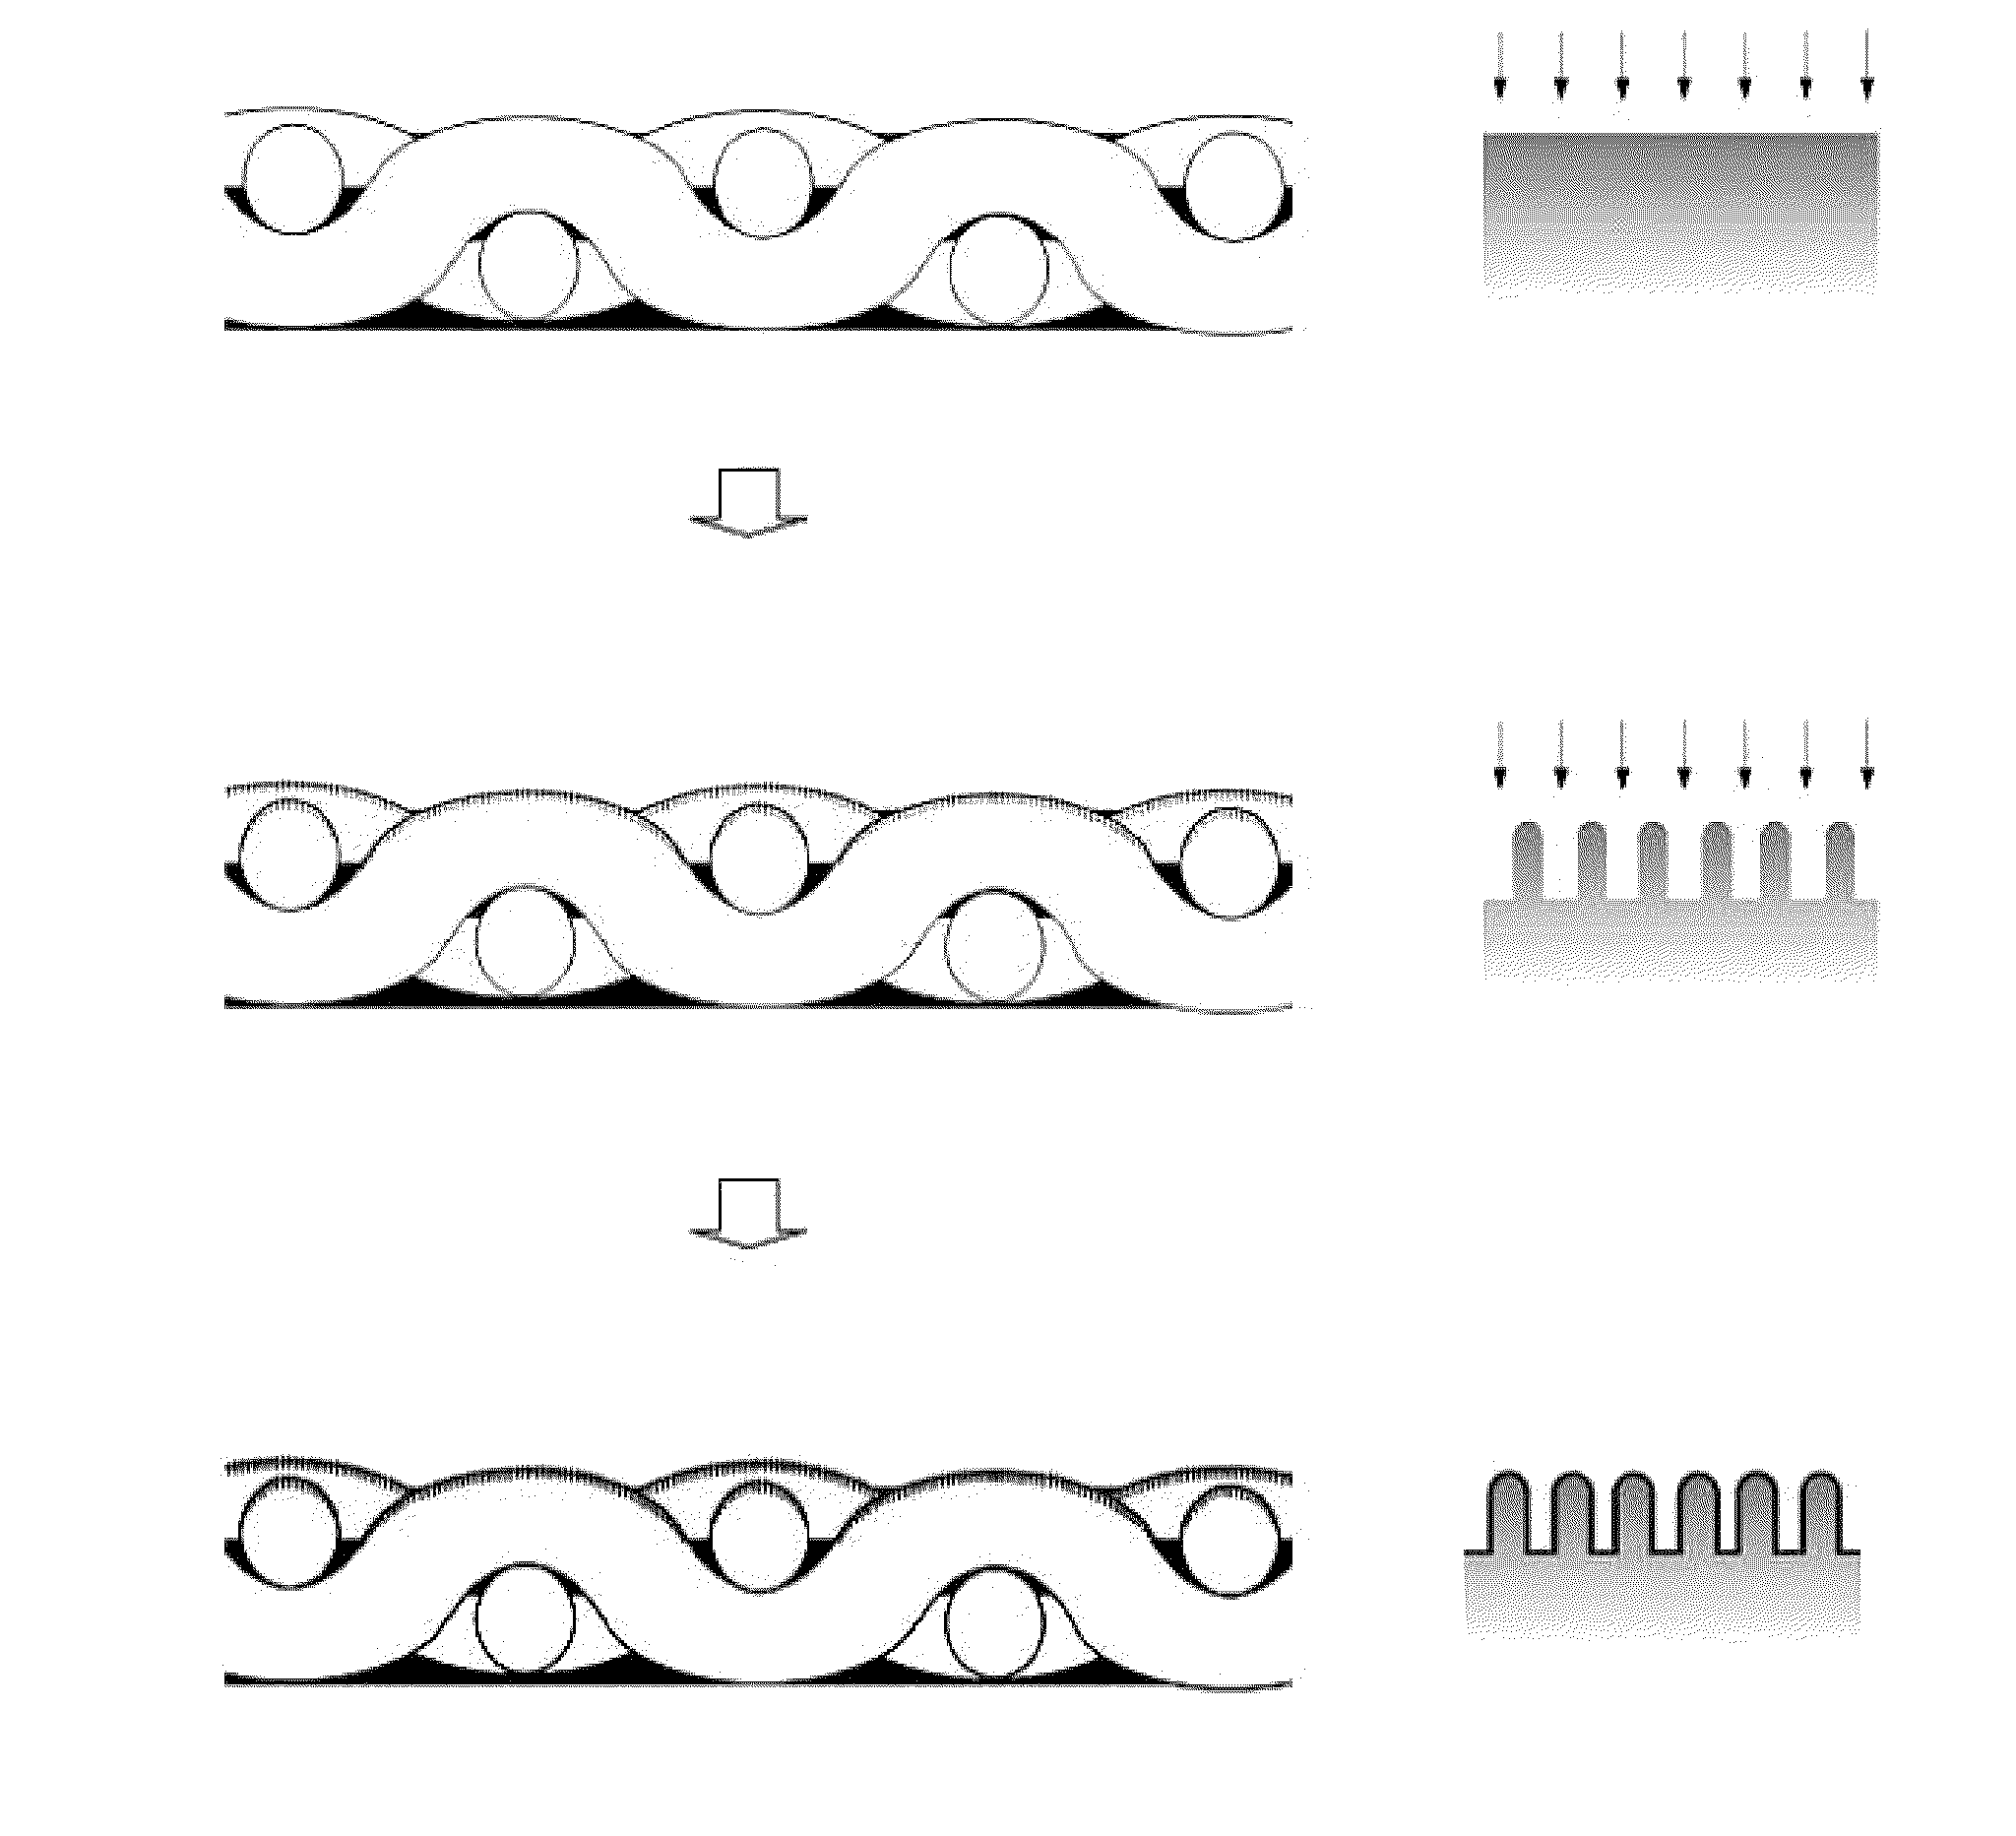 Super-hydrophobic fiber having needle-shaped NANO structure on its surface, method for fabricating the same and fiber product comprising the same